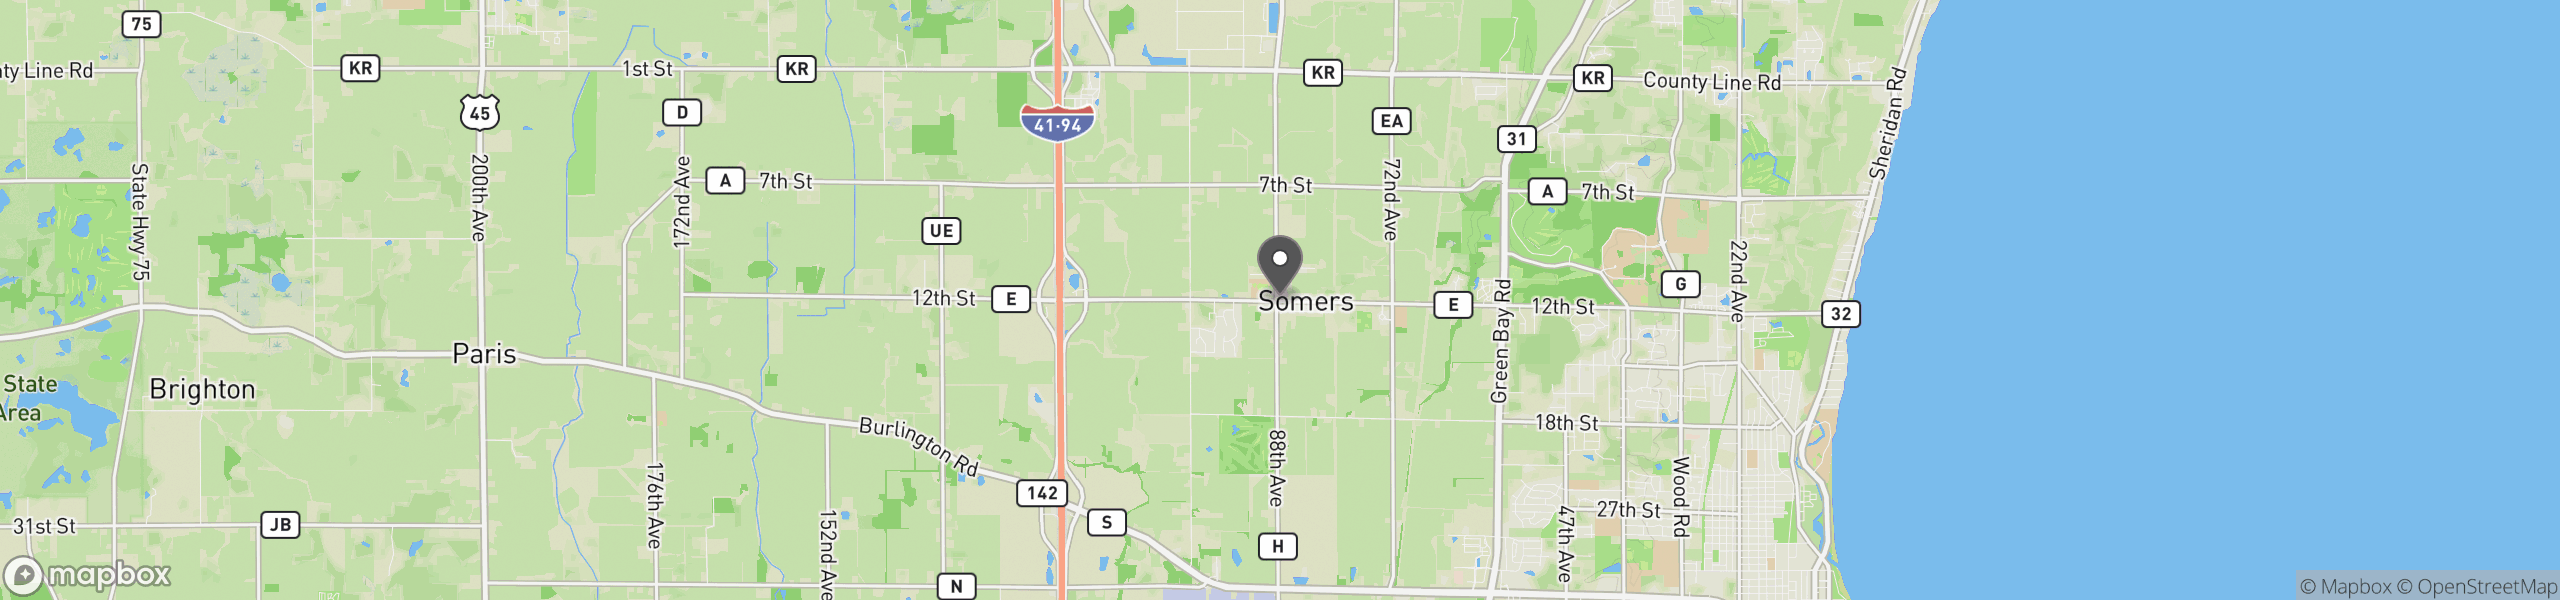 Somers, WI 53171